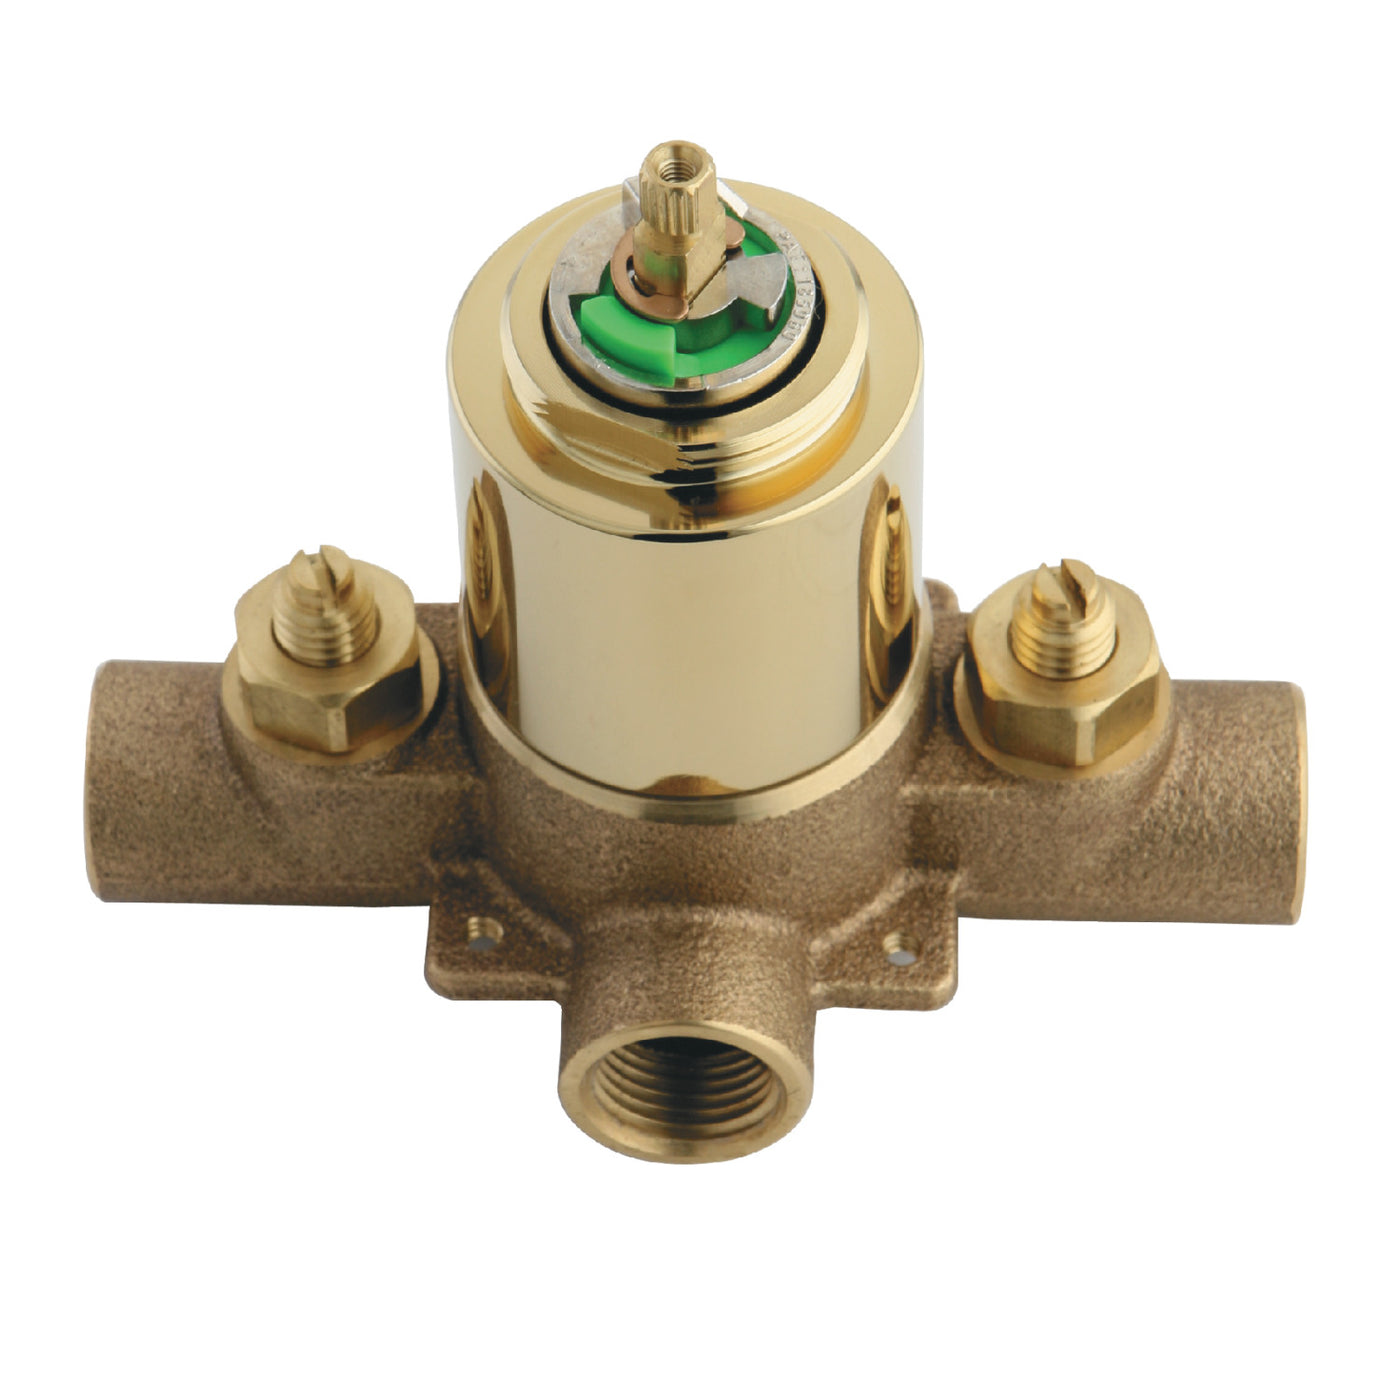 Elements of Design EB652V Pressure Balanced Rough-In Tub and Shower Valve with Stops, Polished Brass